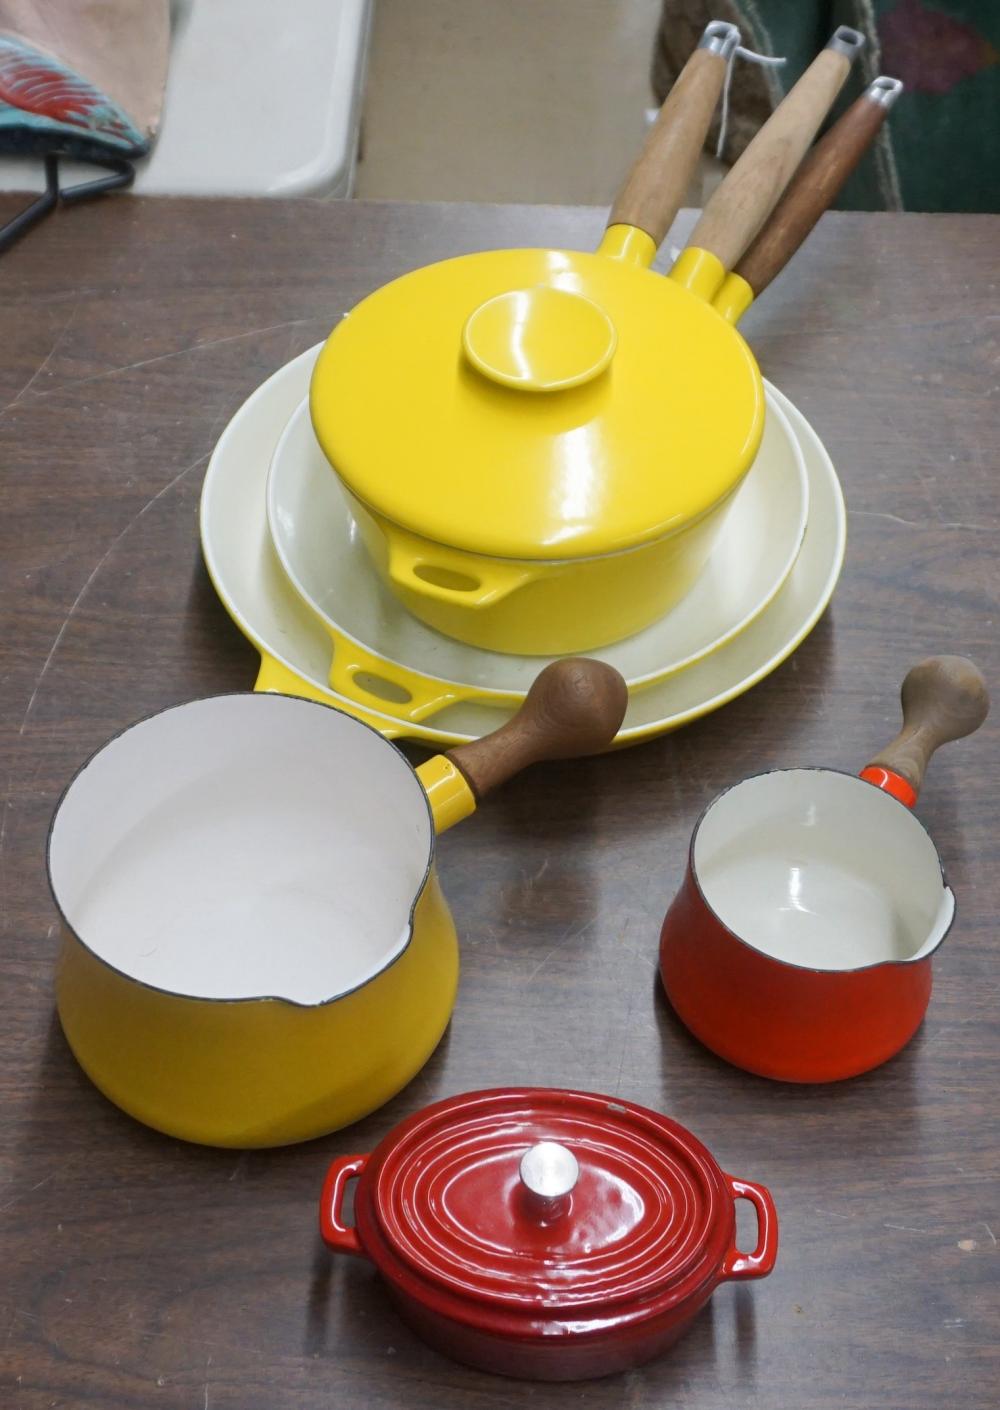 COLLECTION OF DANSK ENAMEL COOKWARECollection